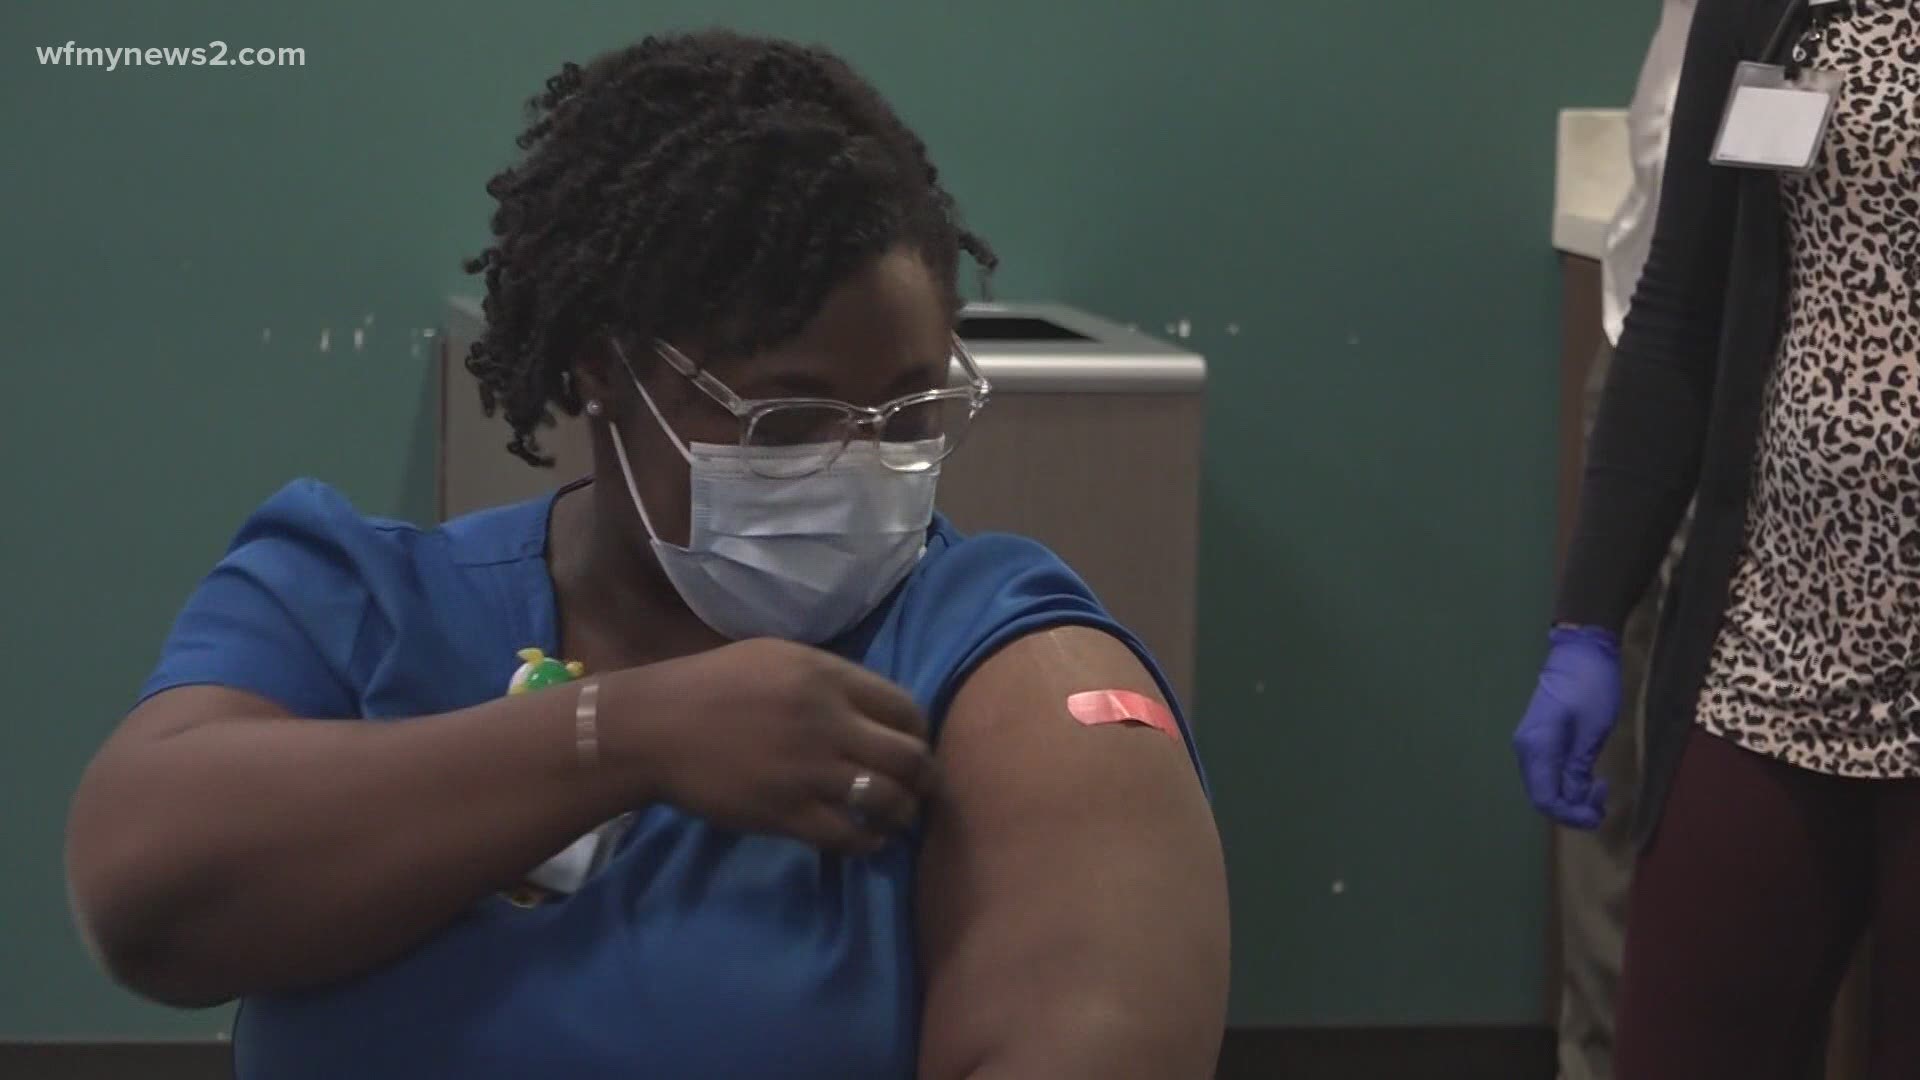 A viewer wanted to know if the COVID-19 vaccine, like the flu vaccine, is an annual shot.